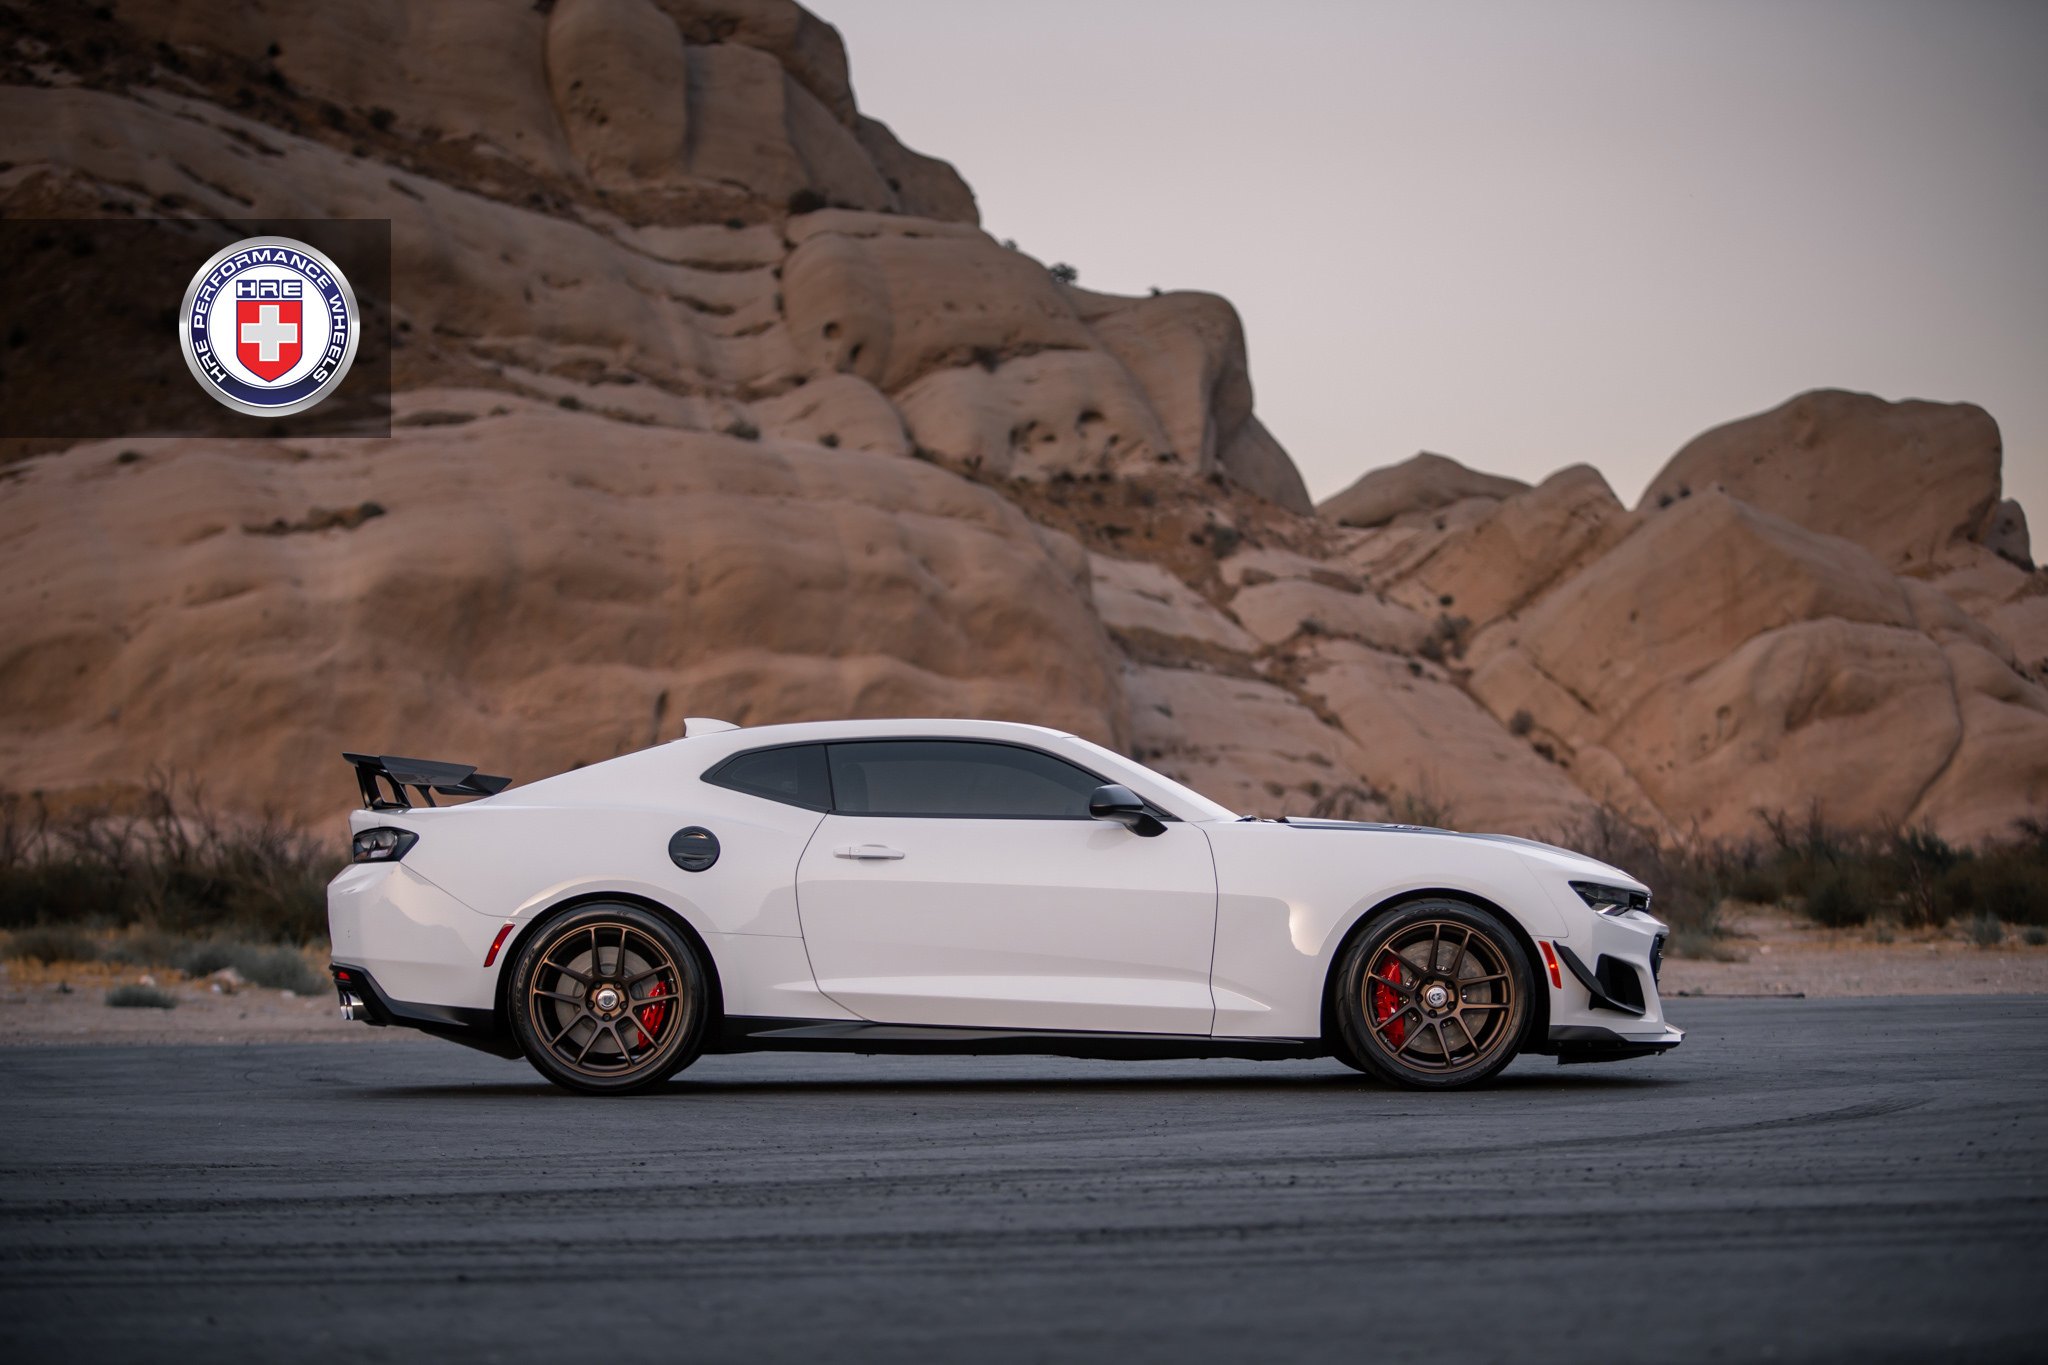 Aftermarket Side Skirts on White Chevy Camaro - Photo by HRE Wheels